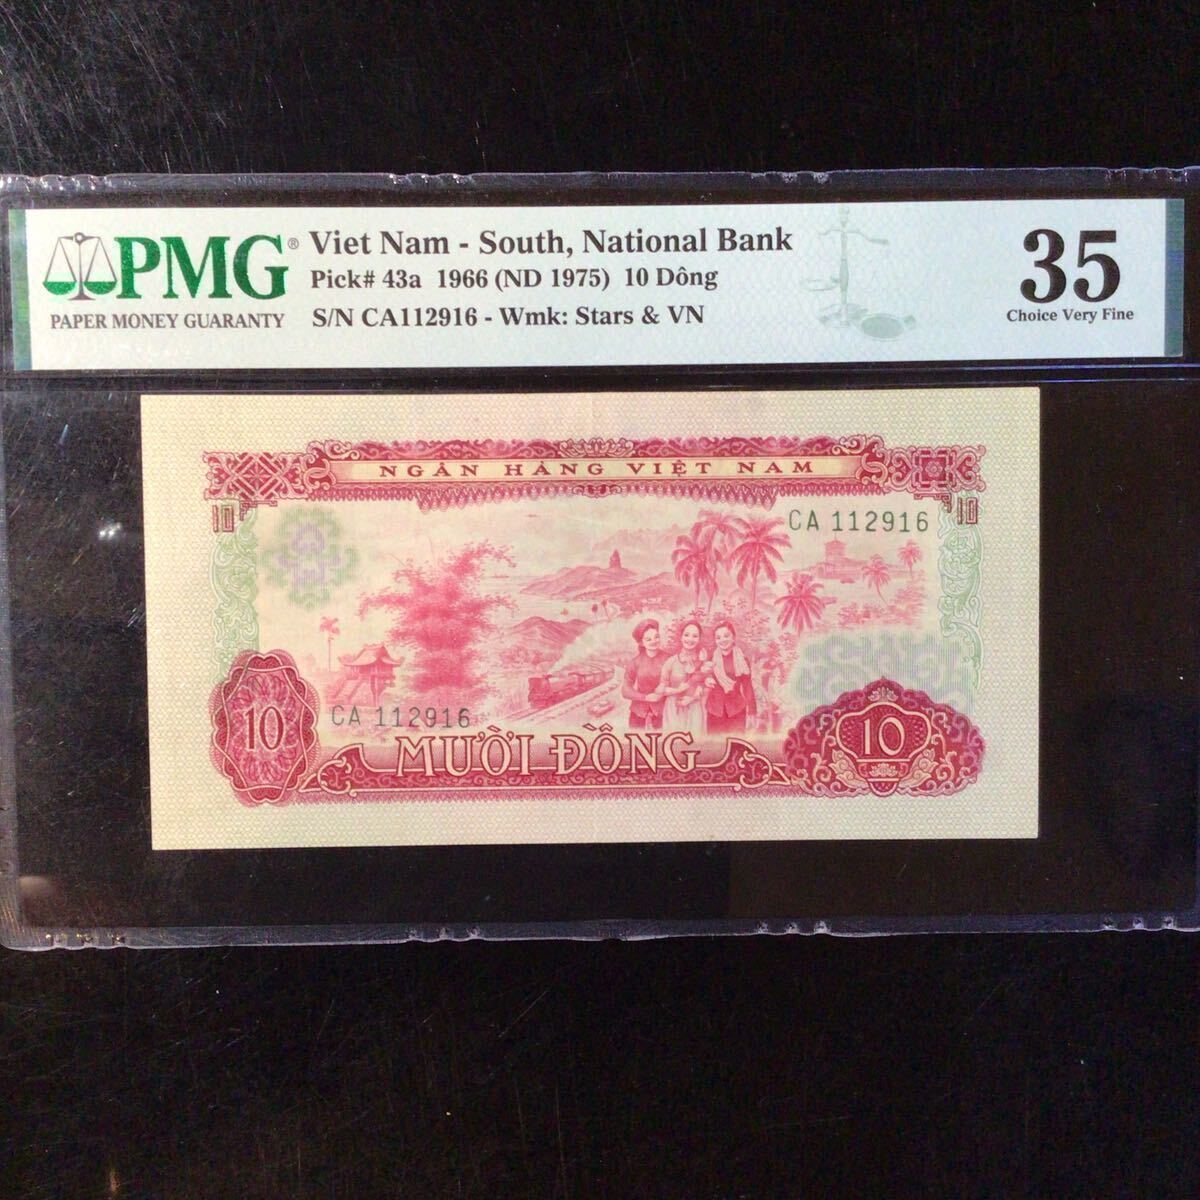 World Banknote Grading SOUTH VIET NAM《National Bank of Viet Nam》10 Dong【1966】『PMG Grading Choice Very Fine 35』_画像1